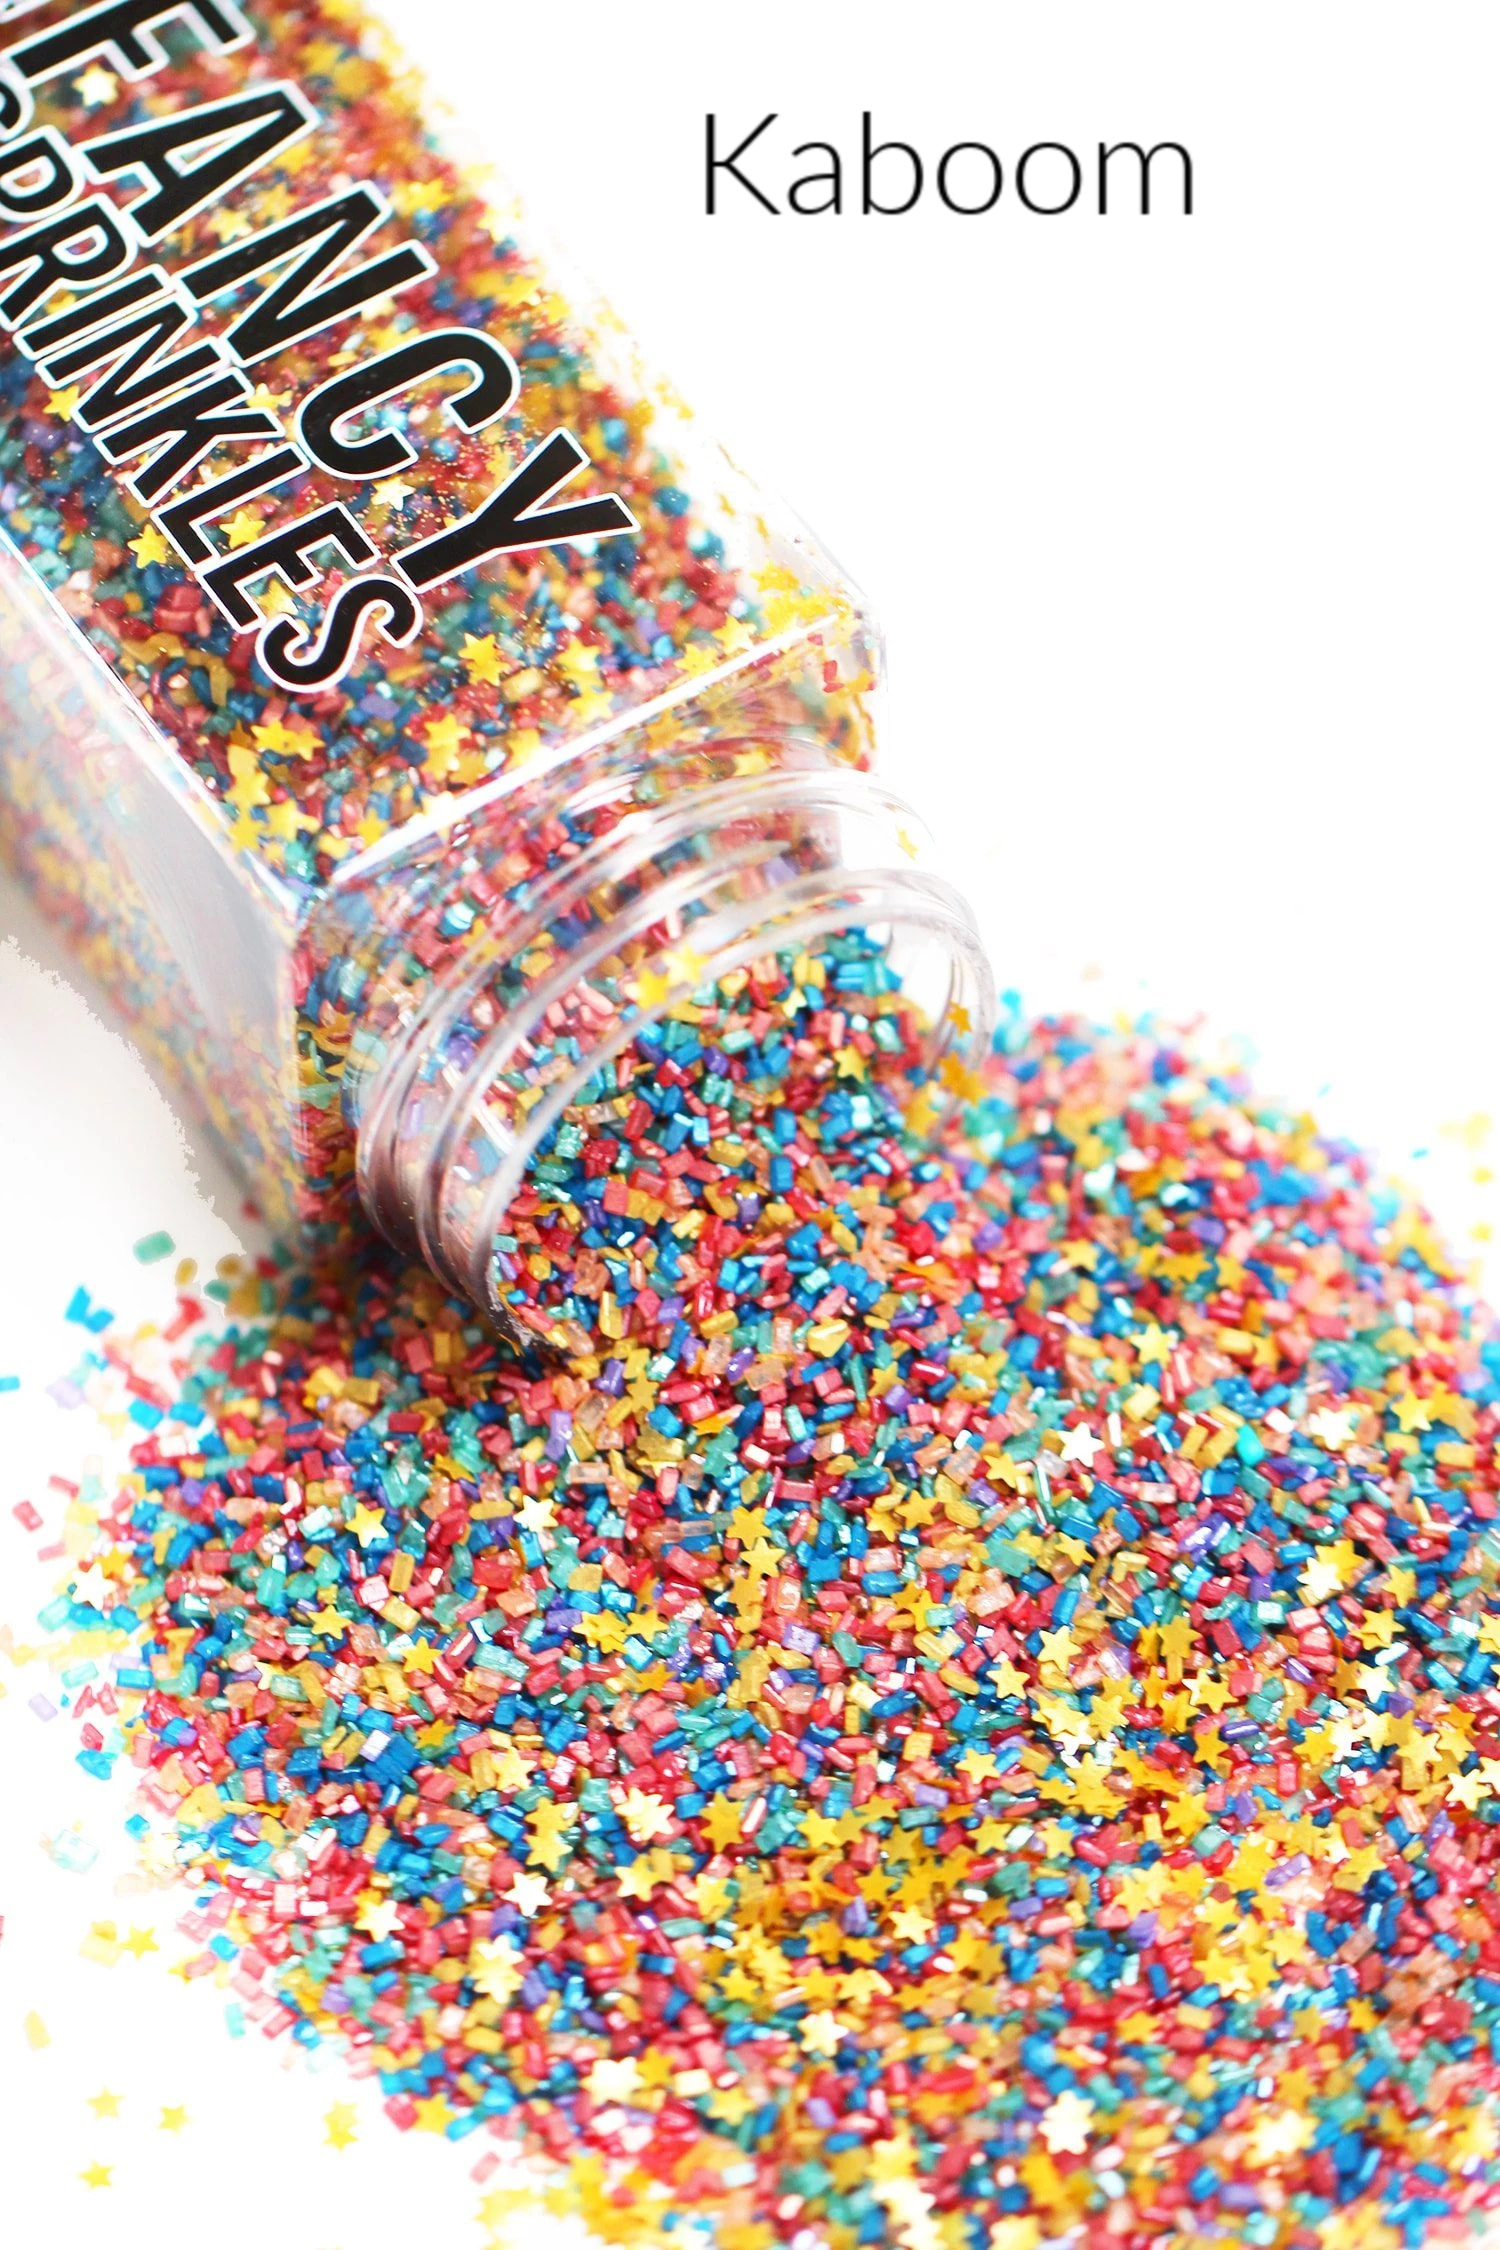 Fancy Sugar Sprinkle Mixes to decorate Cookies, Cakes, Baked Goods